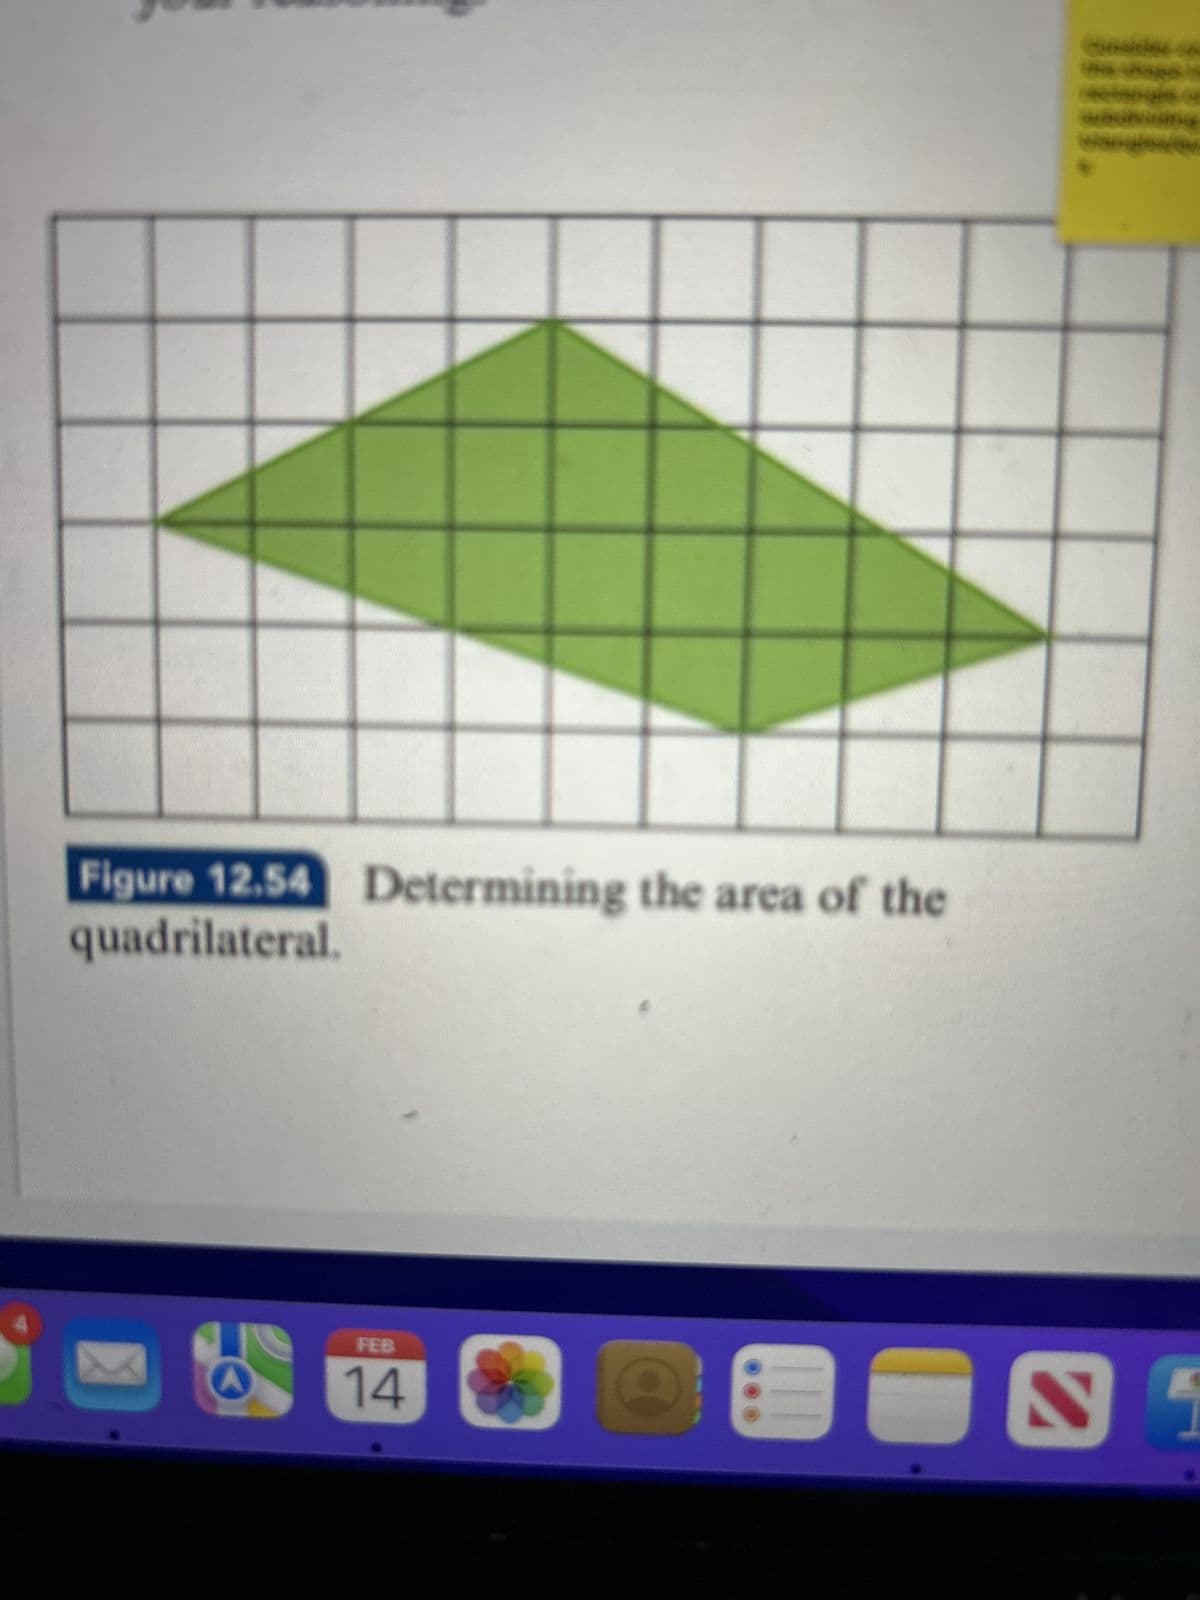 Figure 12.54 Determining the area of the
quadrilateral.
FEB
14
ENT